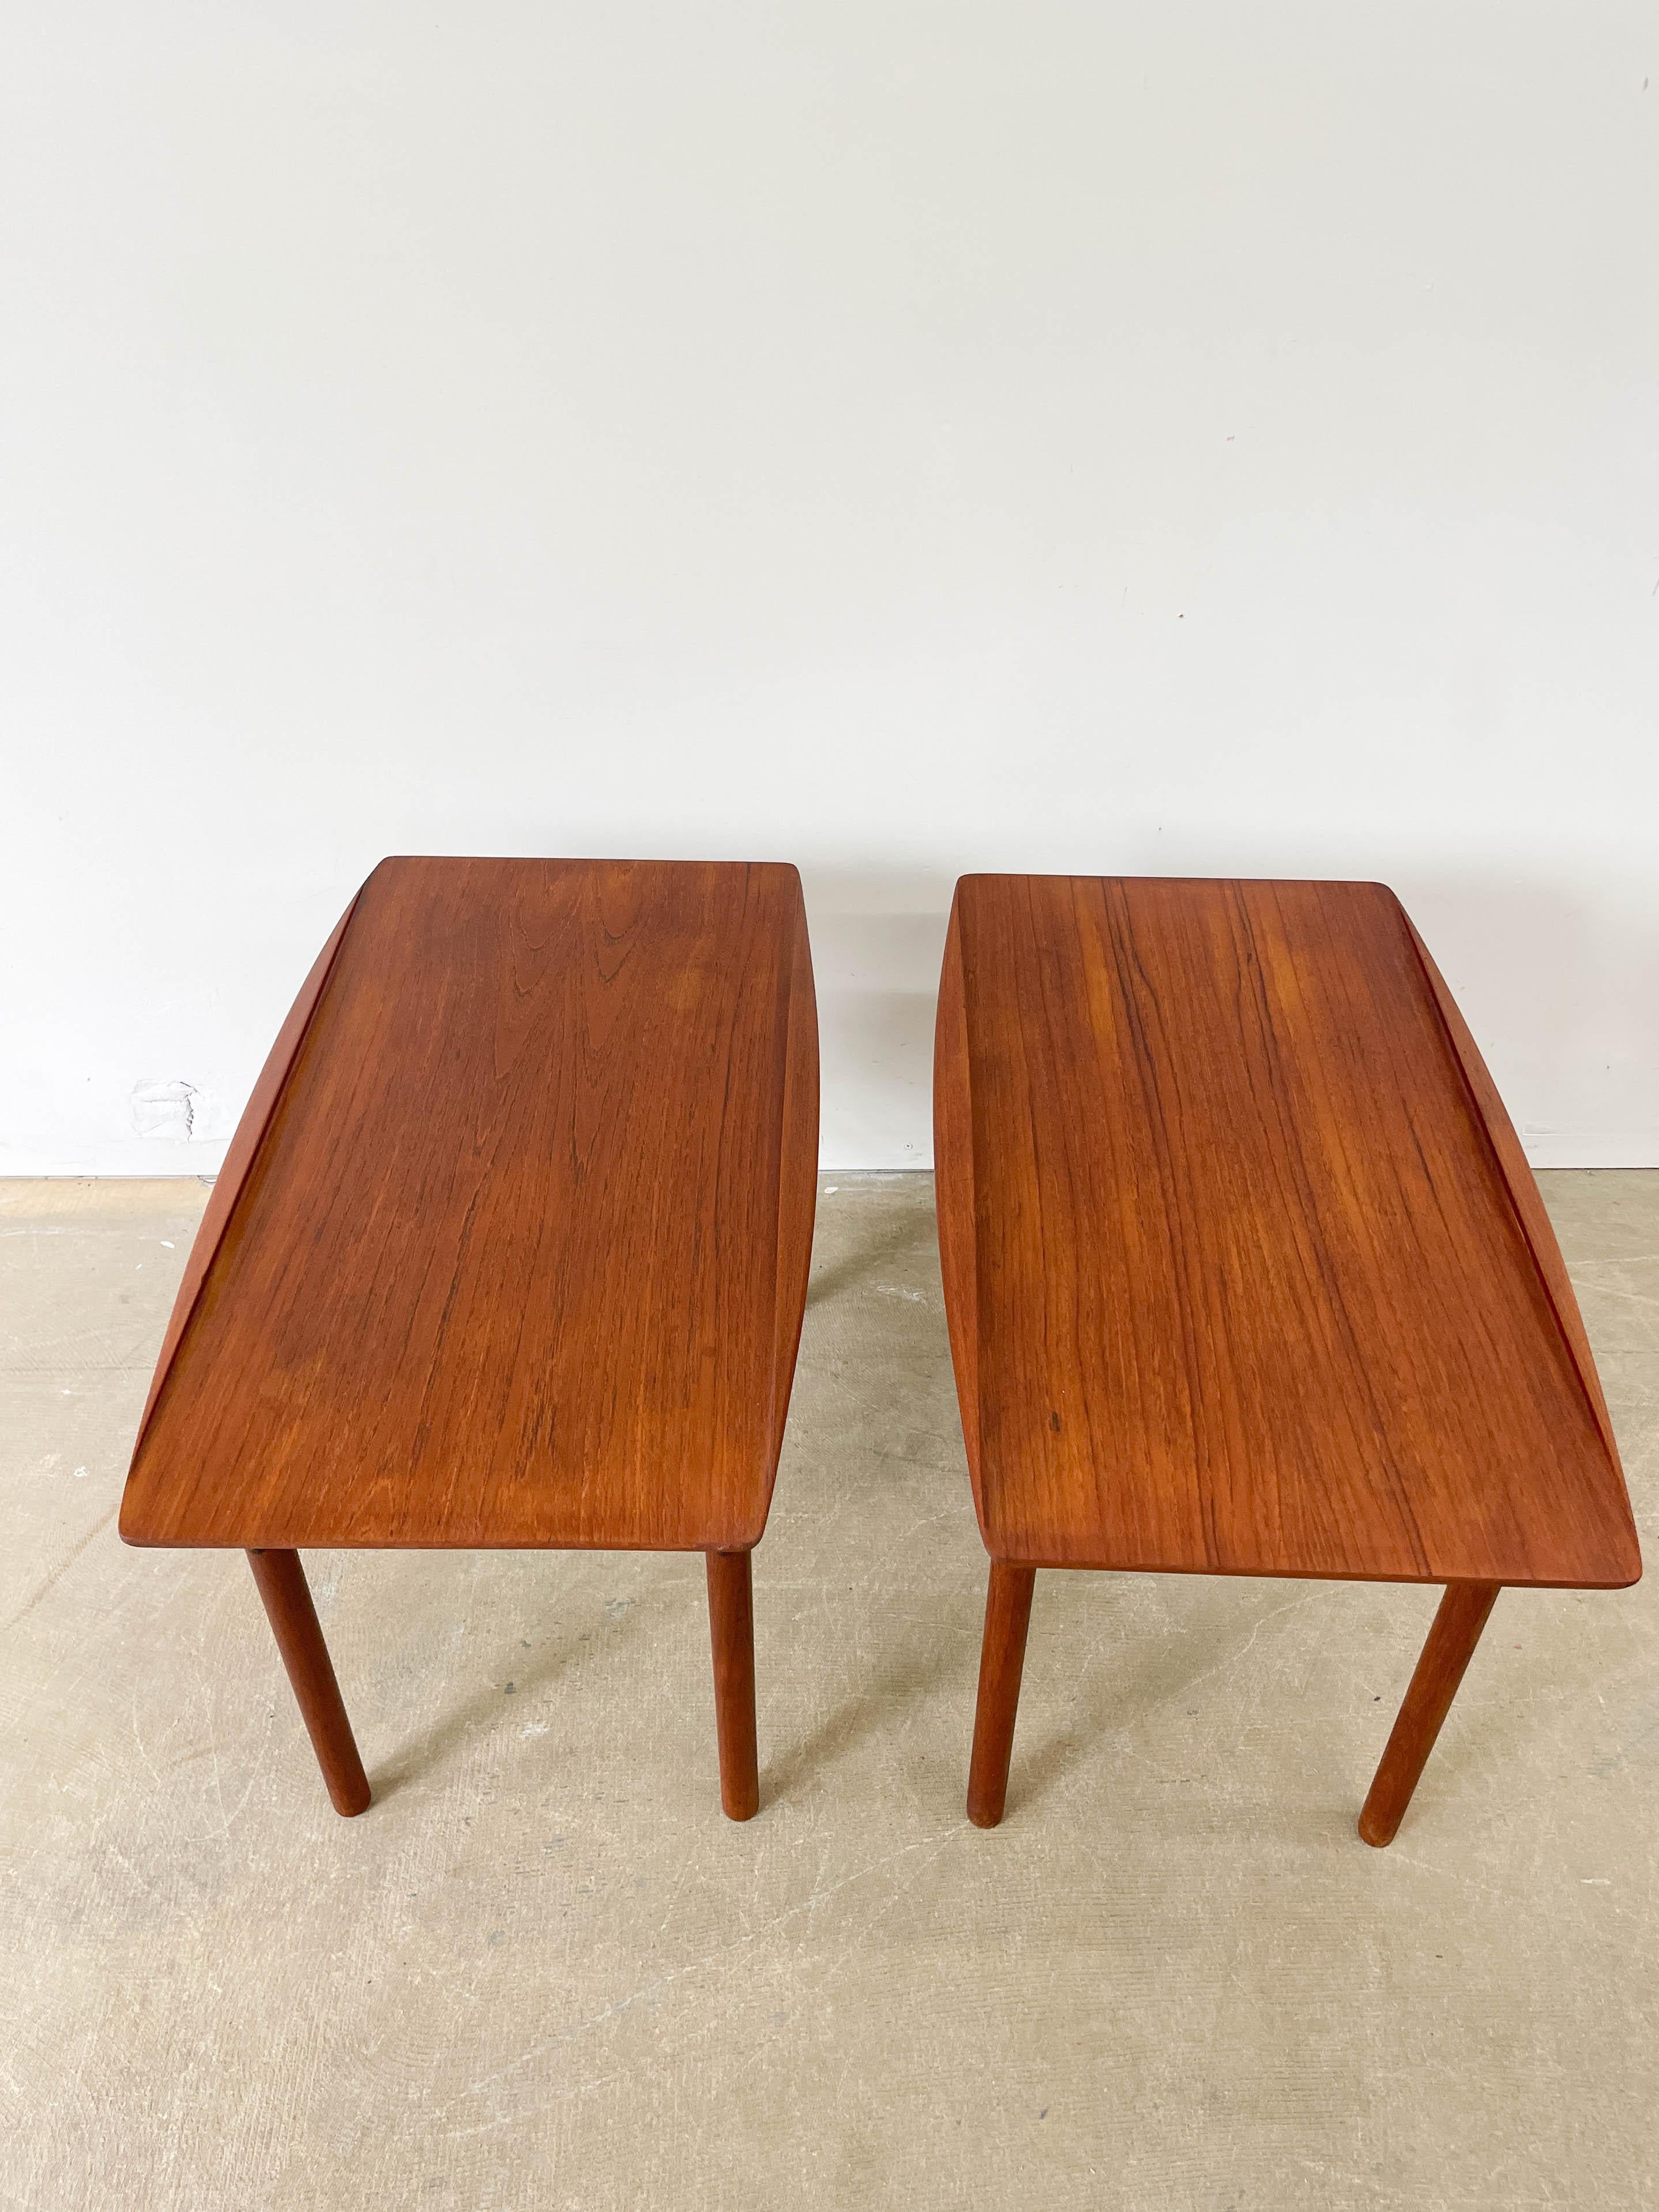 Pair of Grete Jalk Danish Teak Side Tables In Good Condition For Sale In Kalamazoo, MI